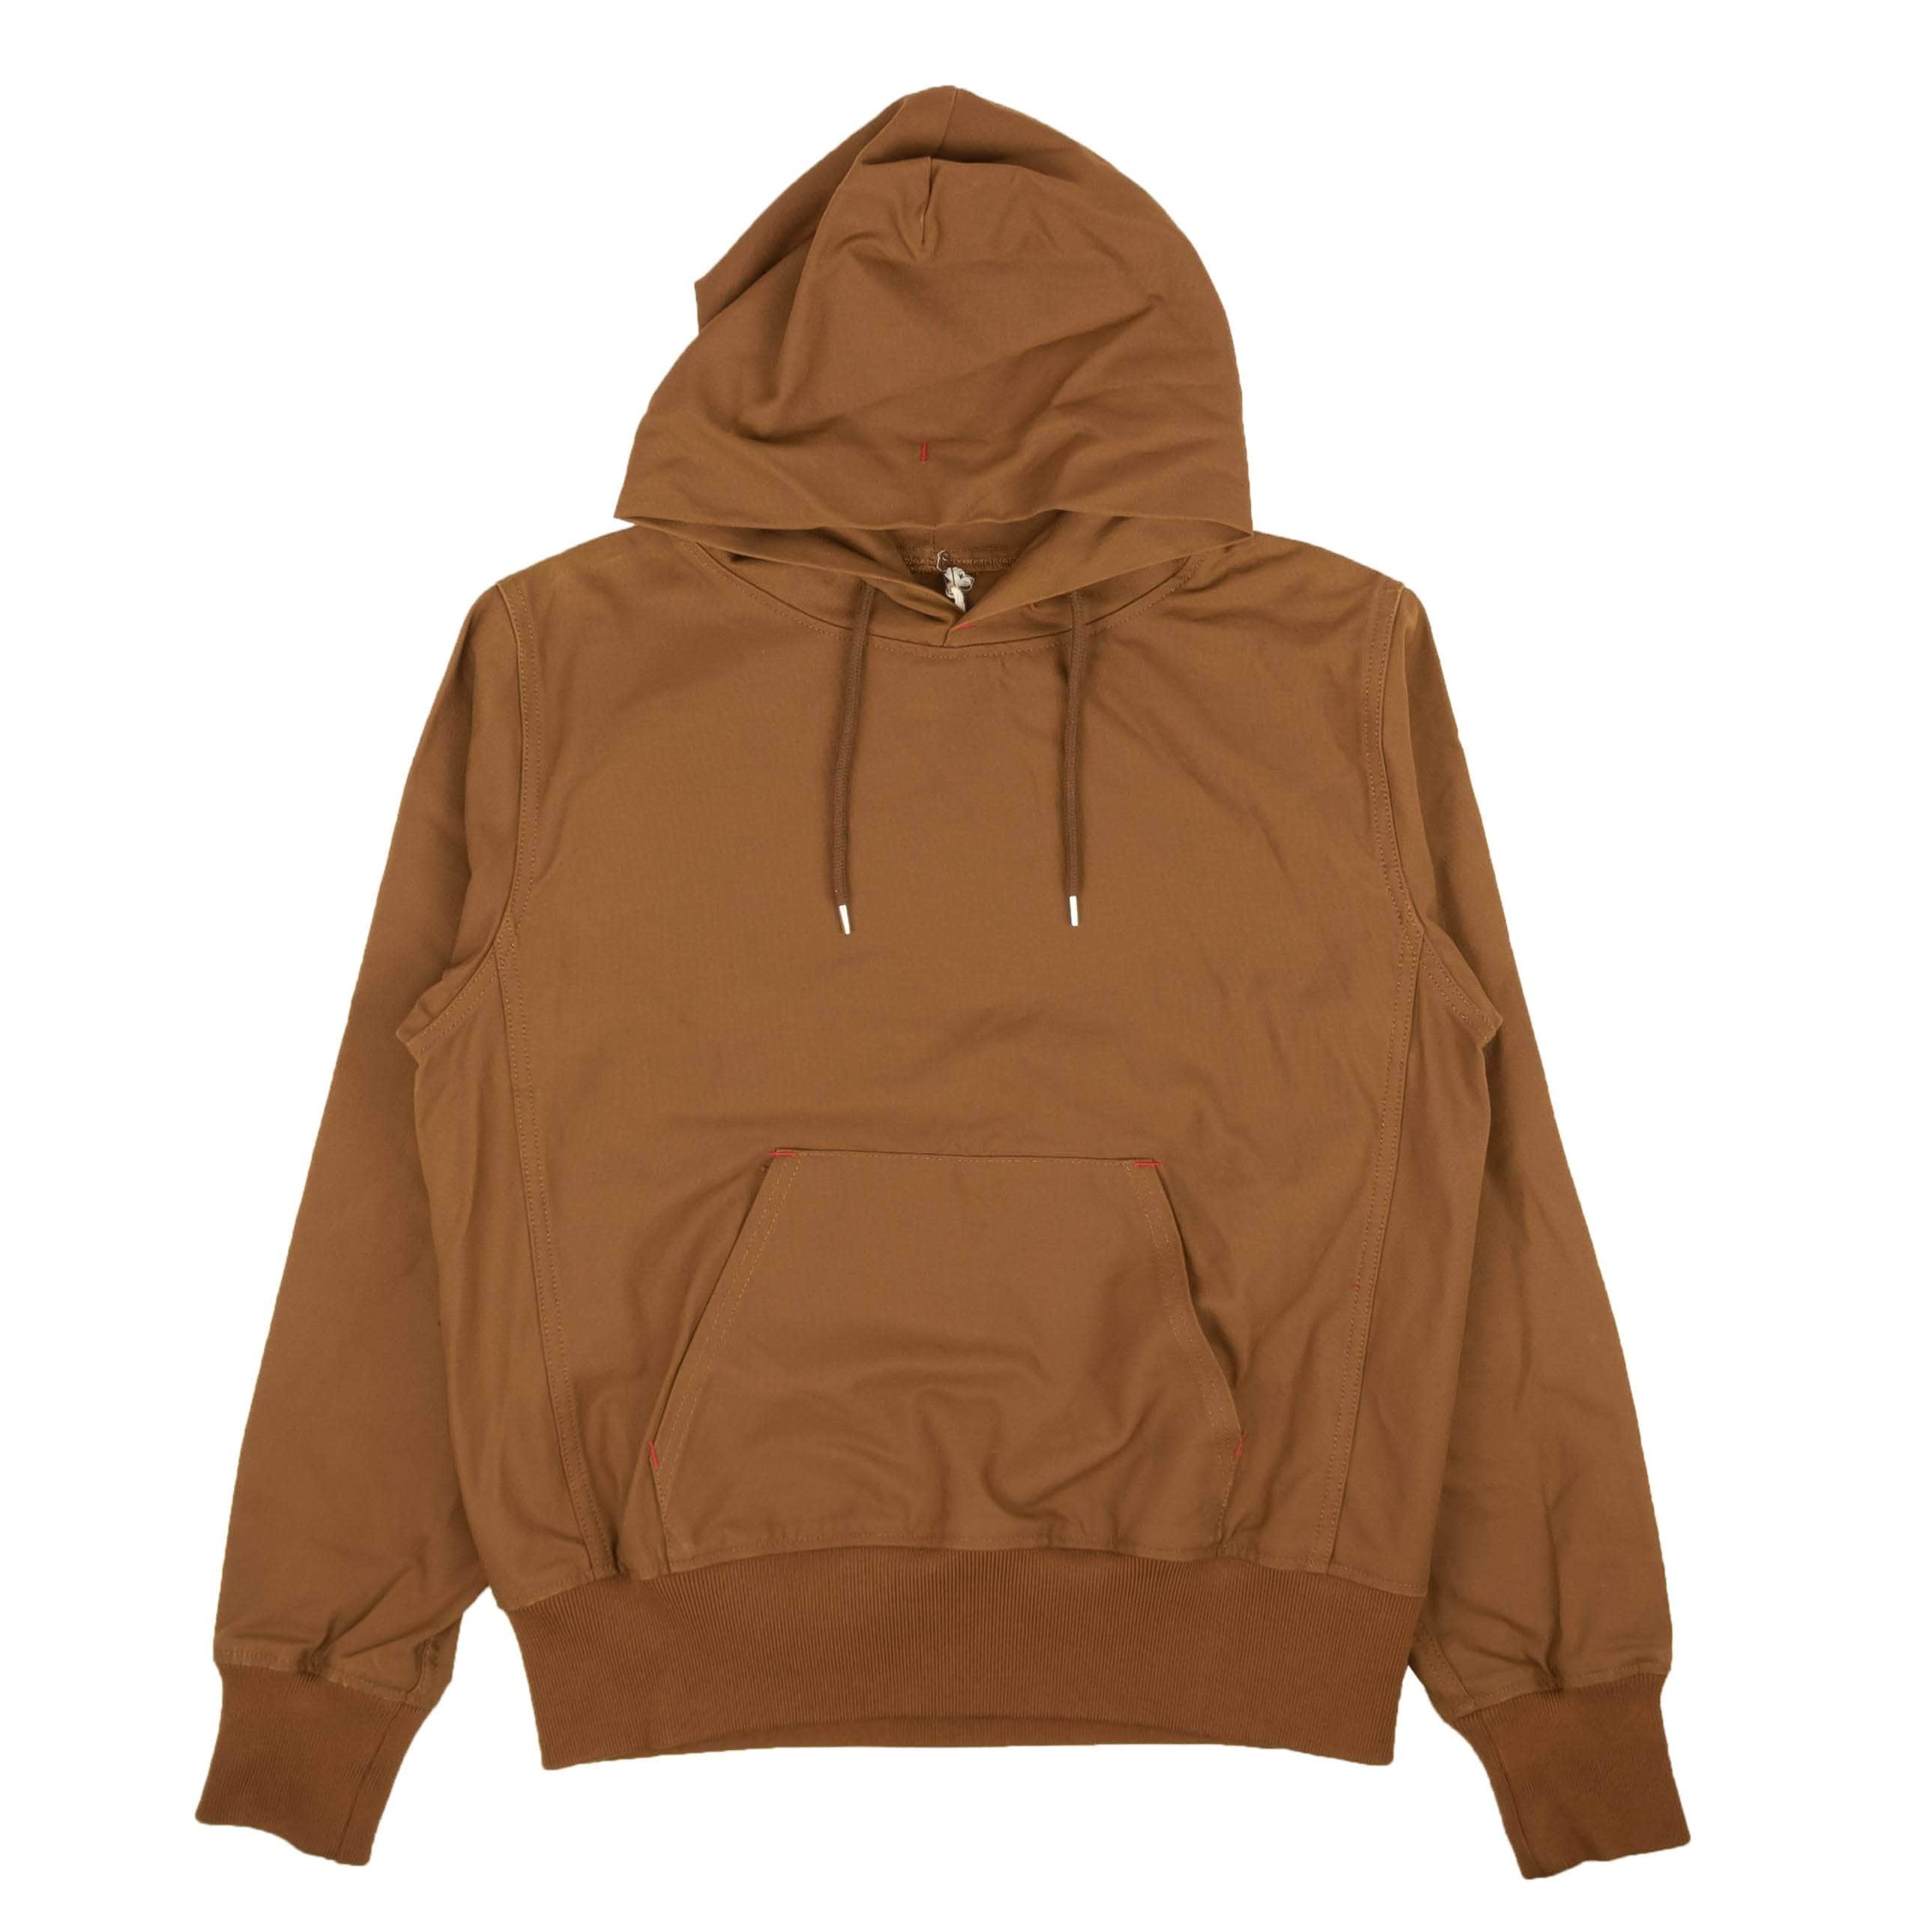 TAKAHIROMIYASHITATheSoloist. 500-750, channelenable-all, chicmi, couponcollection, gender-mens, main-clothing, mens-shoes, MixedApparel, size-s, takahiromiyashitathesoloist S Camel Brown Pullover Hoodie 95-TTS-1003/S 95-TTS-1003/S